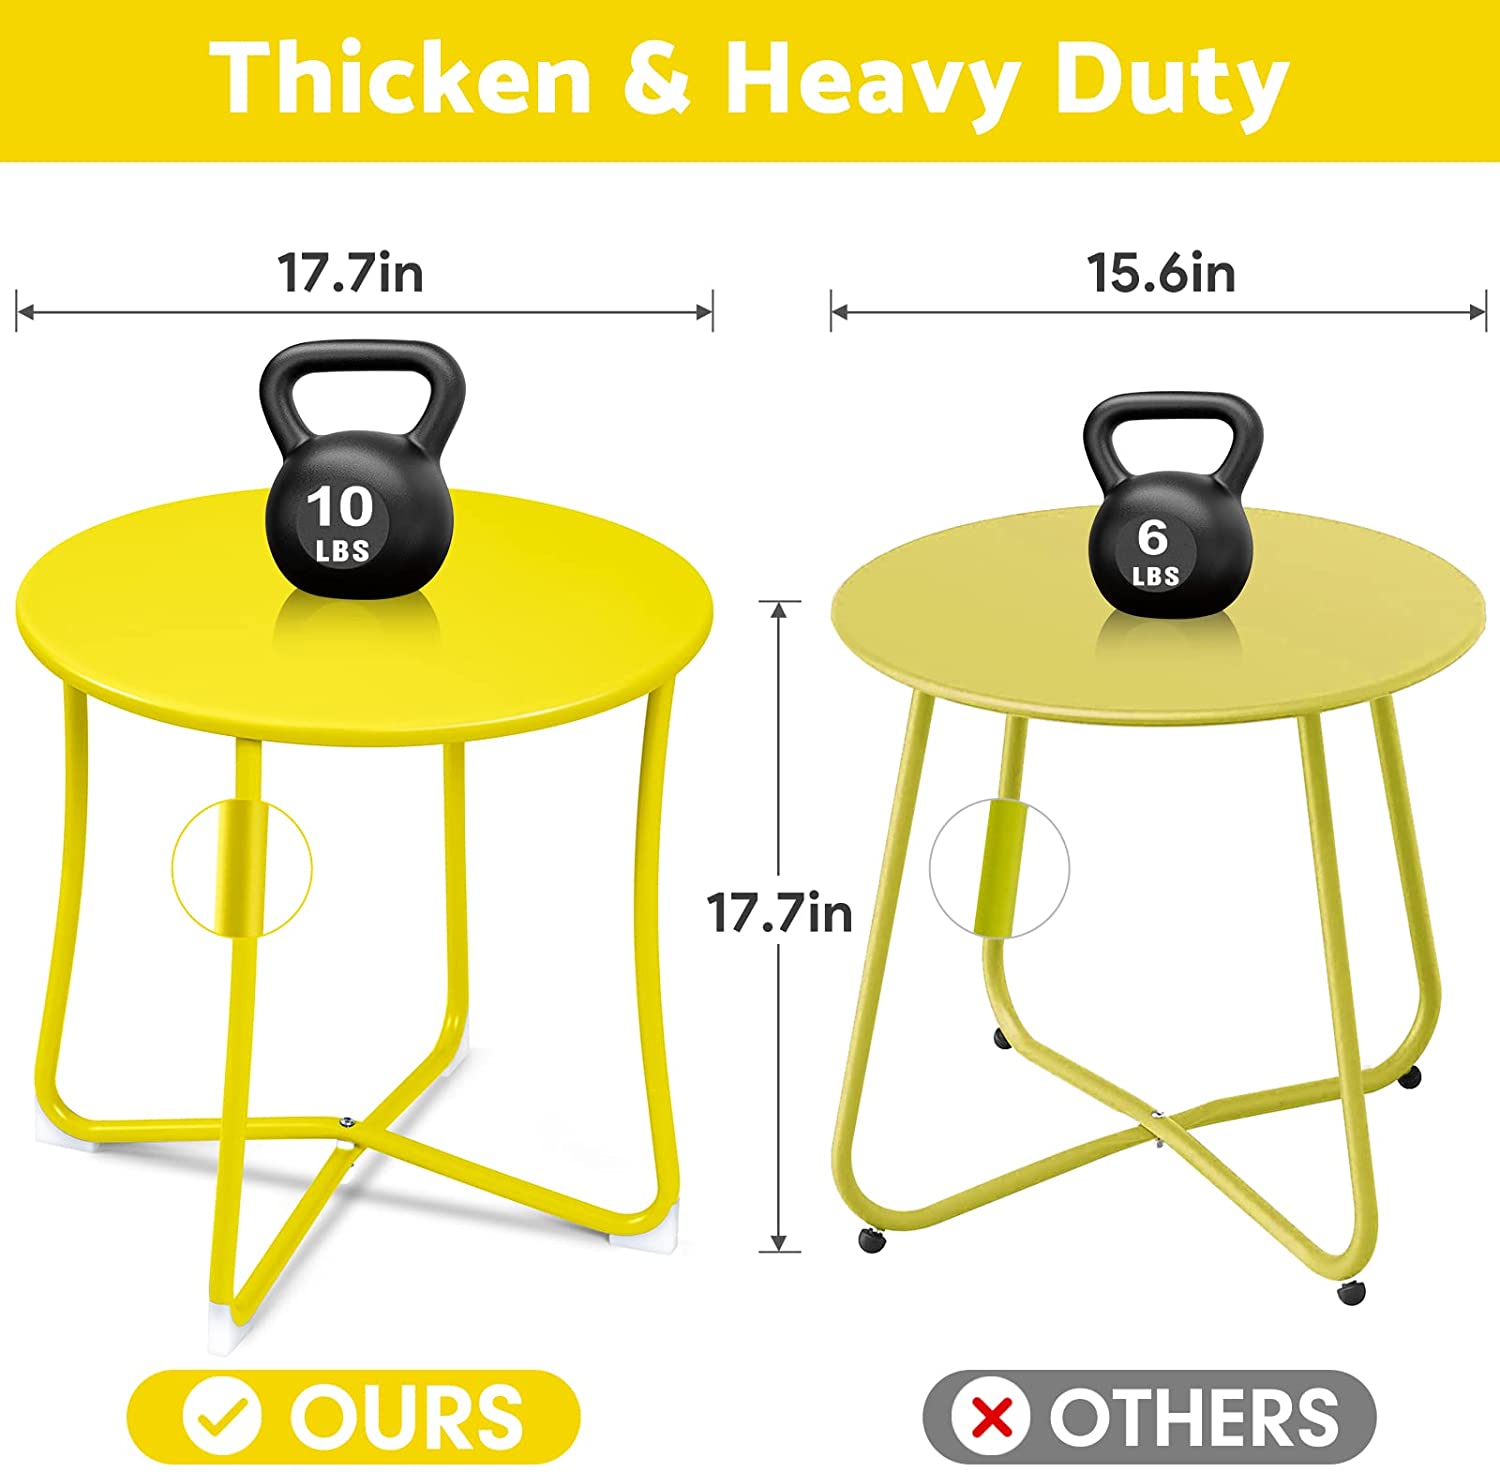 AMAGABELI Metal Patio Side Table 18” x 18” Heavy Duty Weather Resistant Anti-Rust Outdoor End Table Small Steel Round Coffee Table Porch Table Snack Table for Balcony Garden Yard Lawn, Yellow ET091 - image 5 of 8